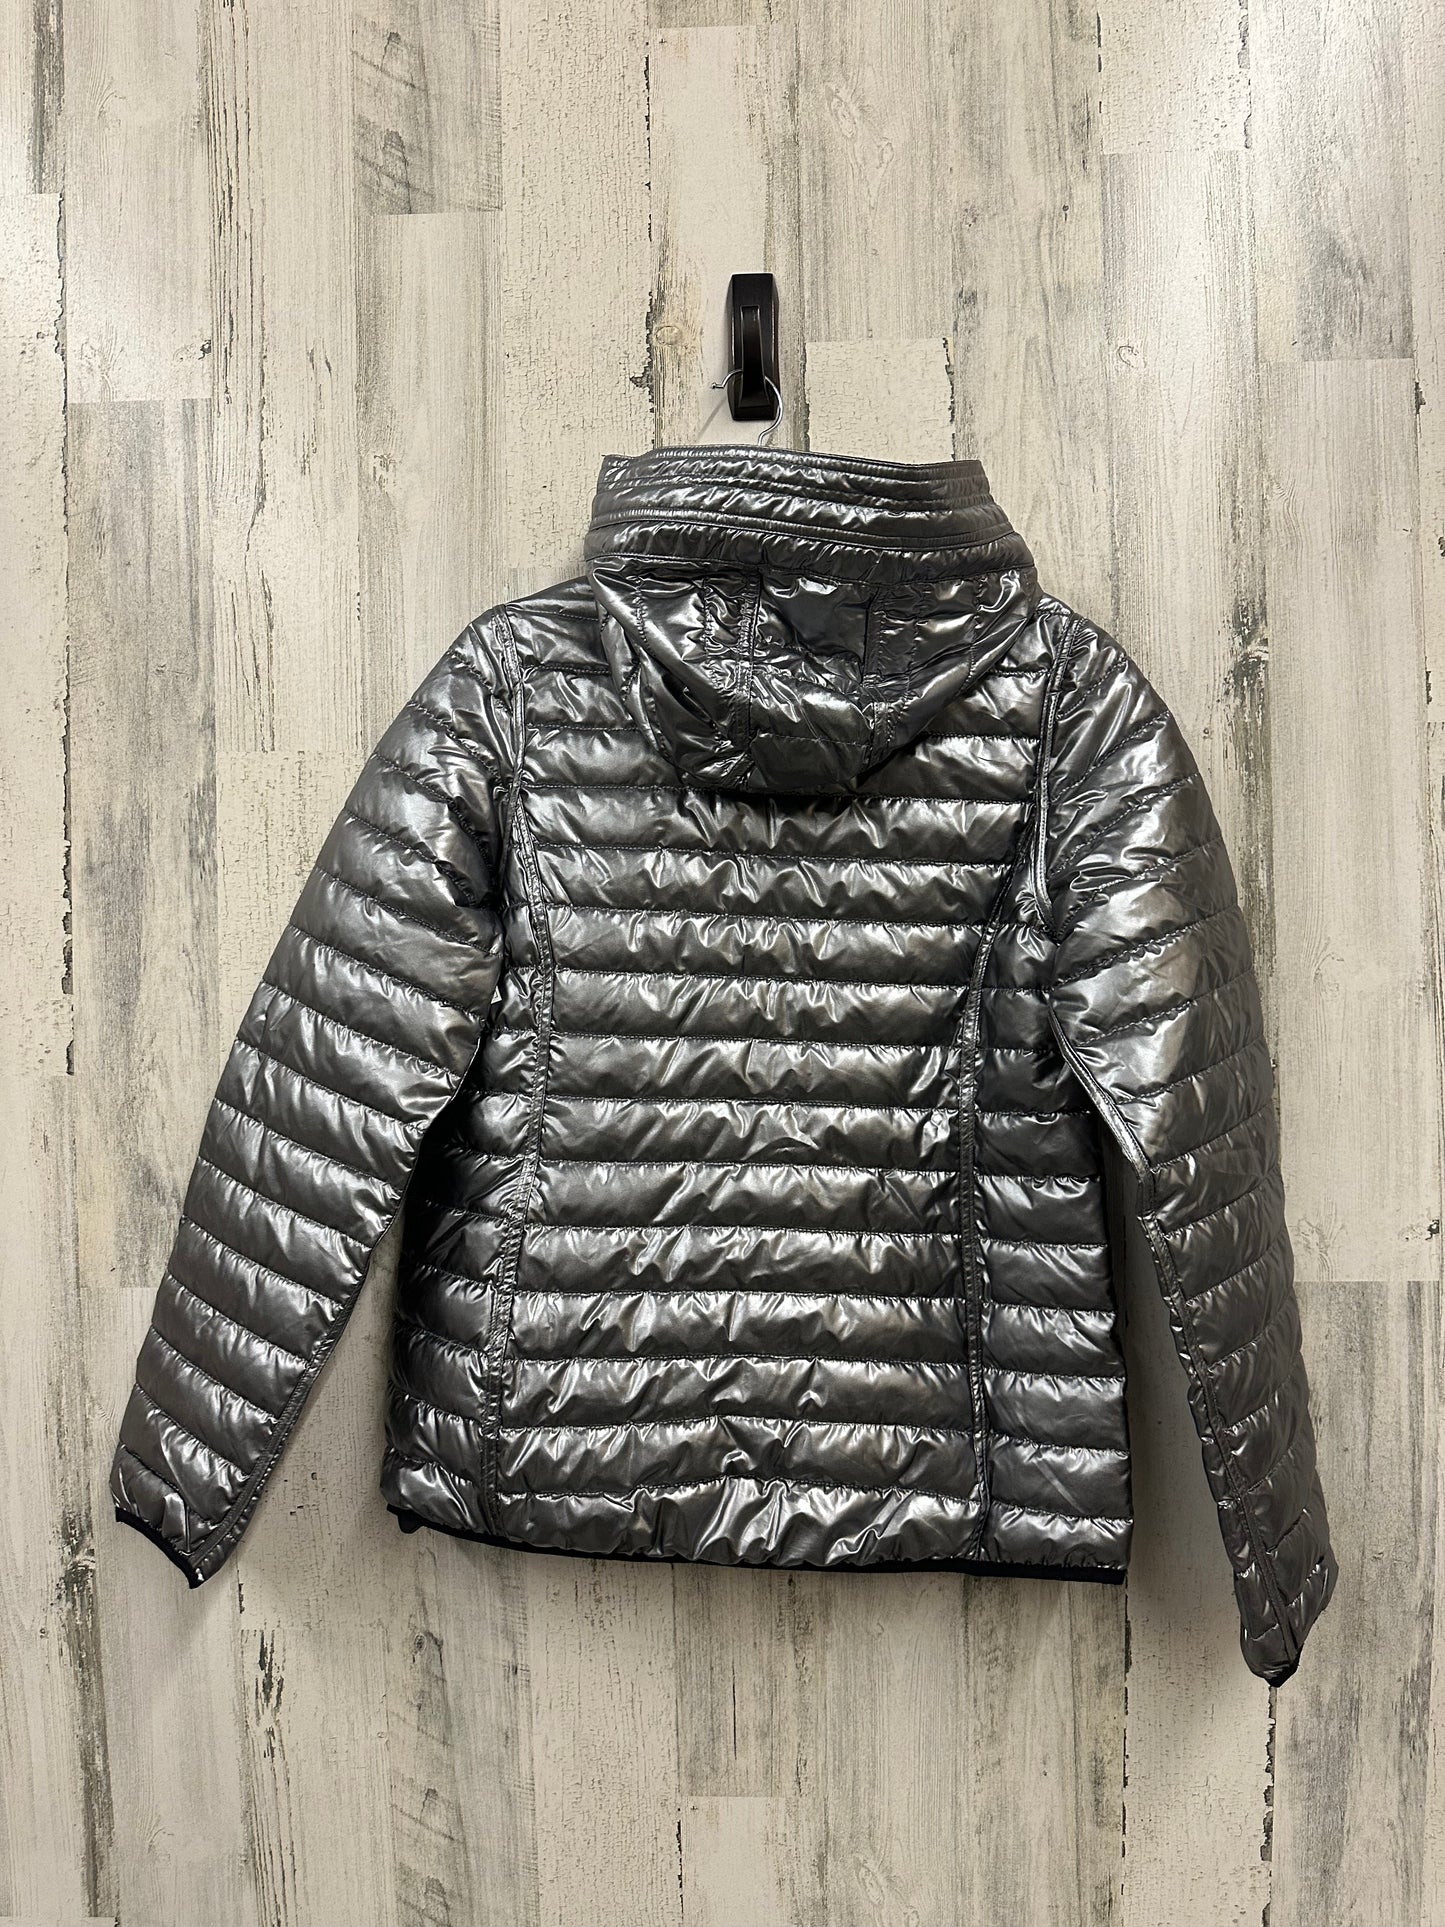 Jacket Puffer & Quilted By Dkny  Size: M